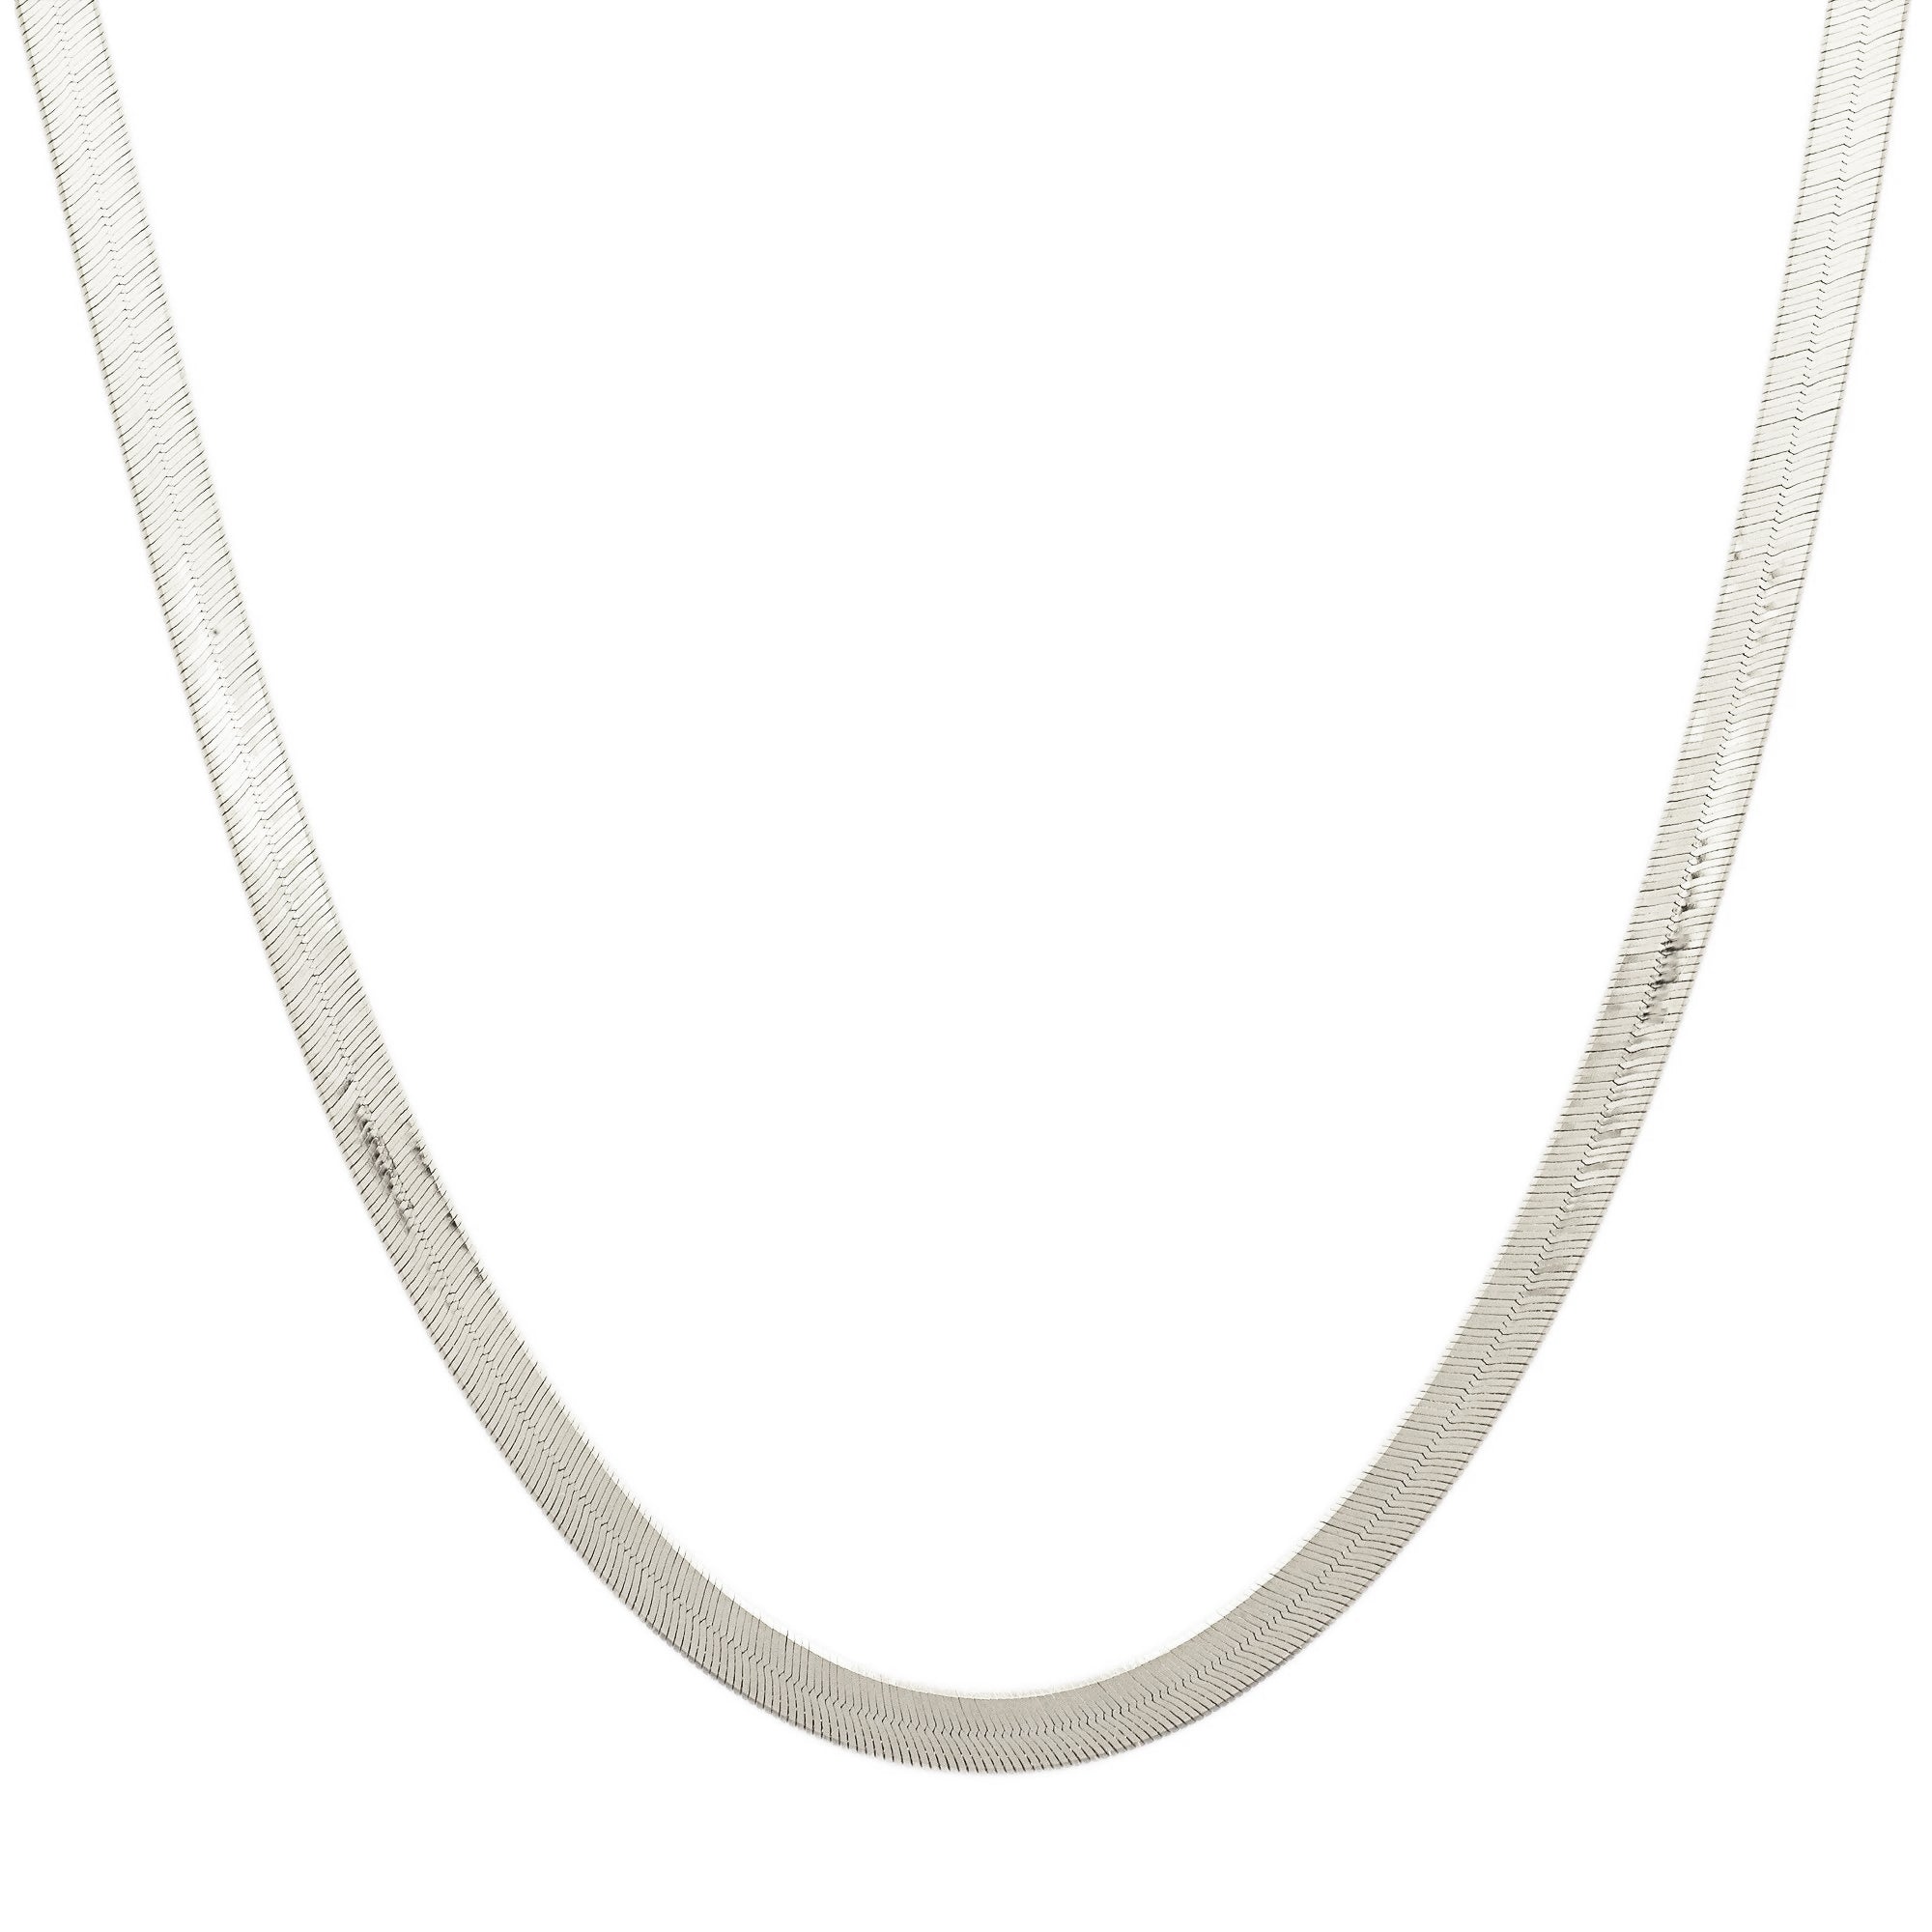 LUXE CHARMING HERRINGBONE CHAIN 16.5 - 18" NECKLACE SILVER - SO PRETTY CARA COTTER